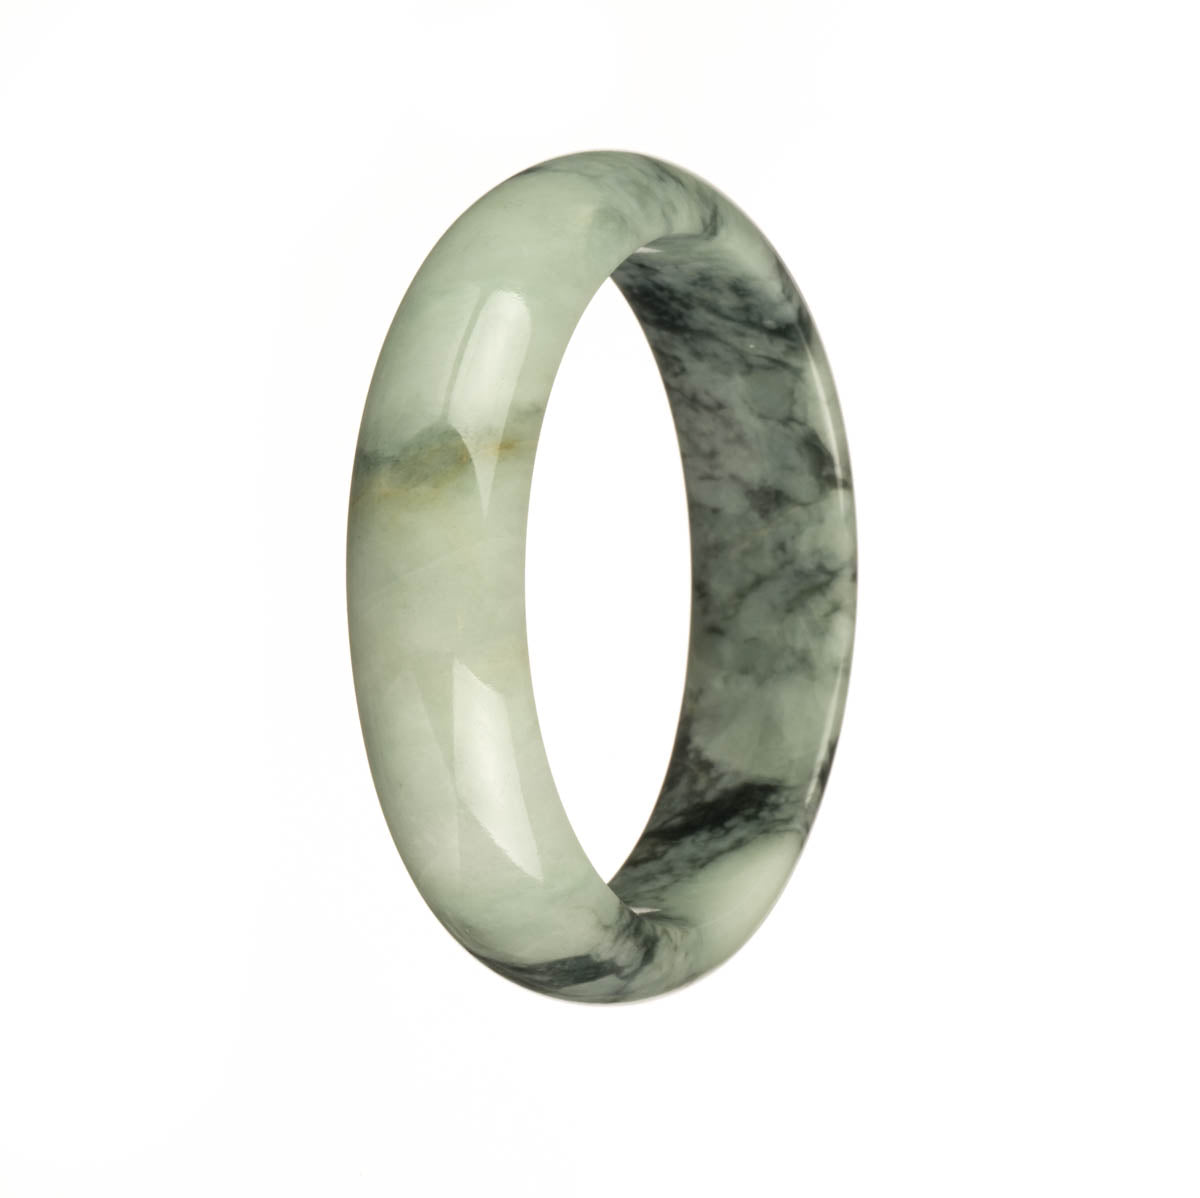 A close-up image of a pale green jadeite bangle bracelet with a dark green pattern, shaped like a half moon.